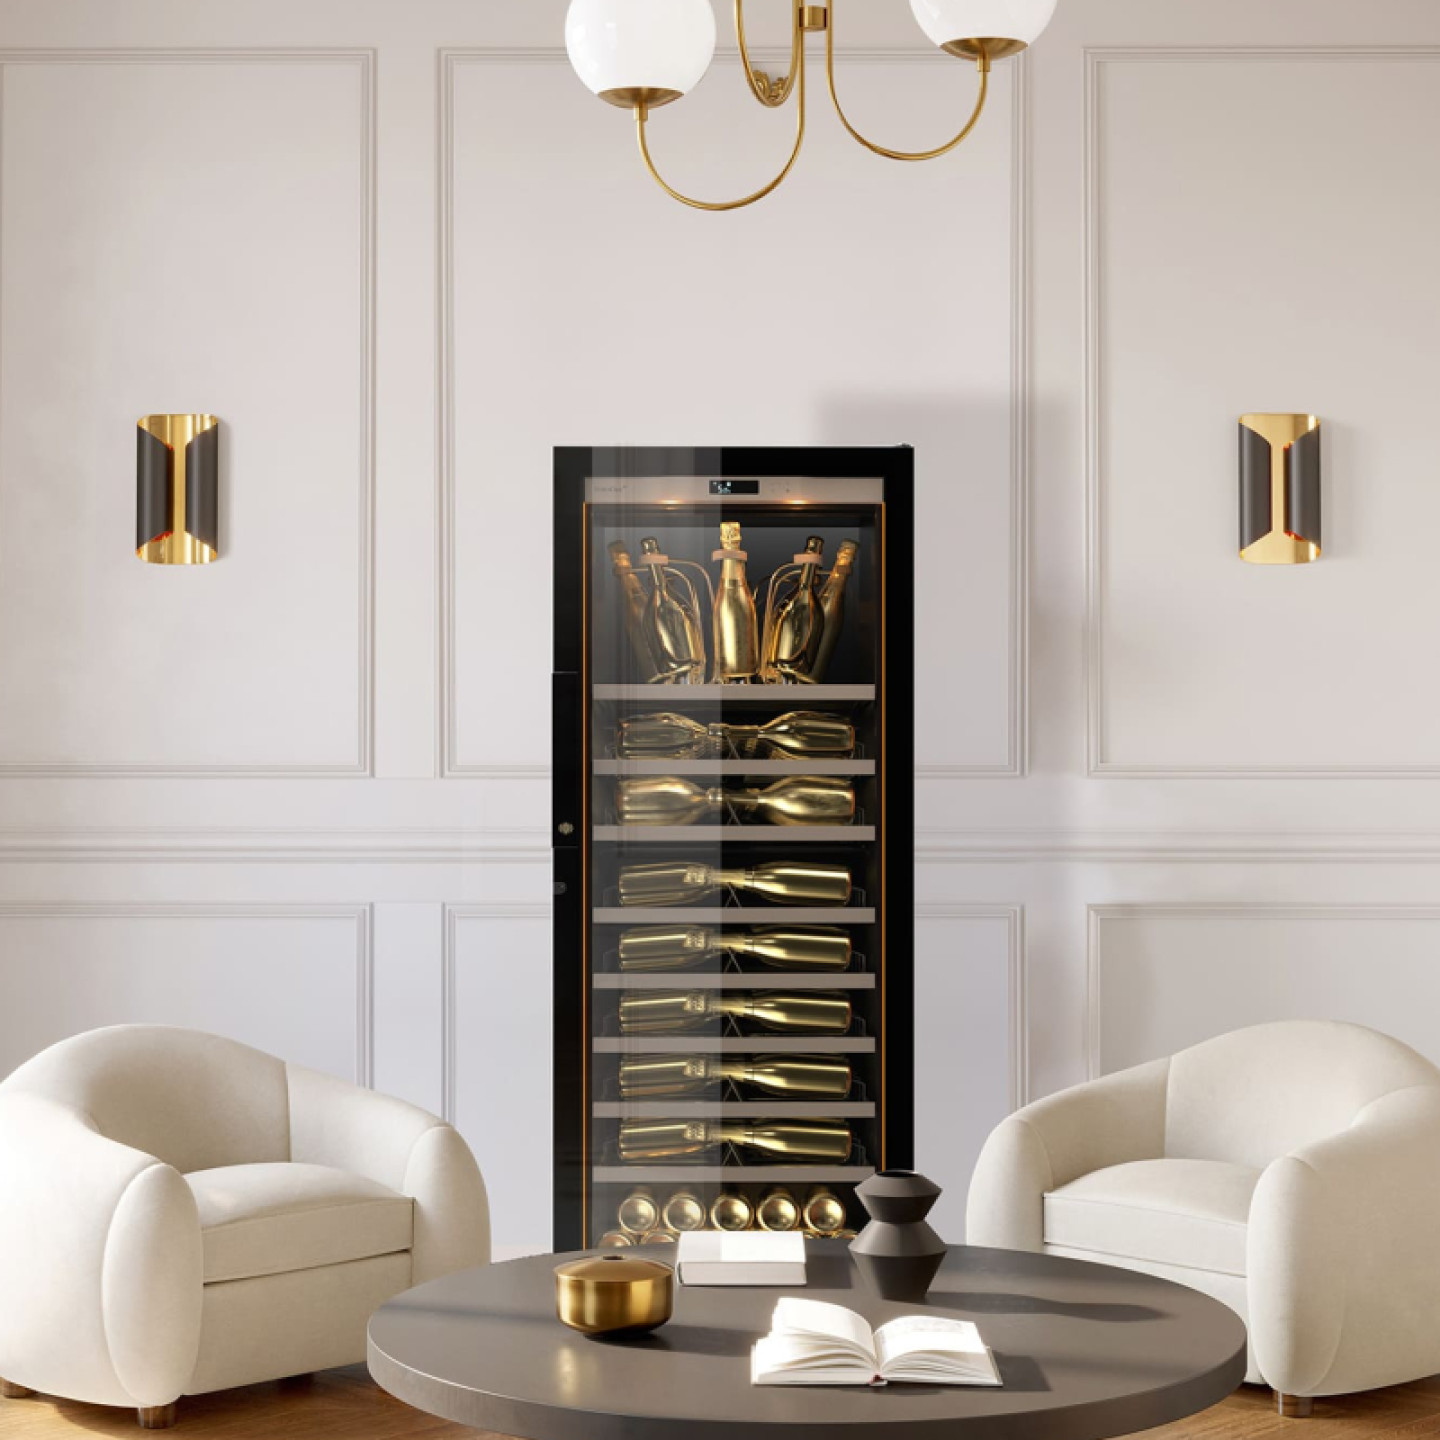 Champagne must be kept at temperature before tasting. Professional 1 temperature cooler with equipment specially designed to accommodate all shapes of champagne bottles up to magnums.